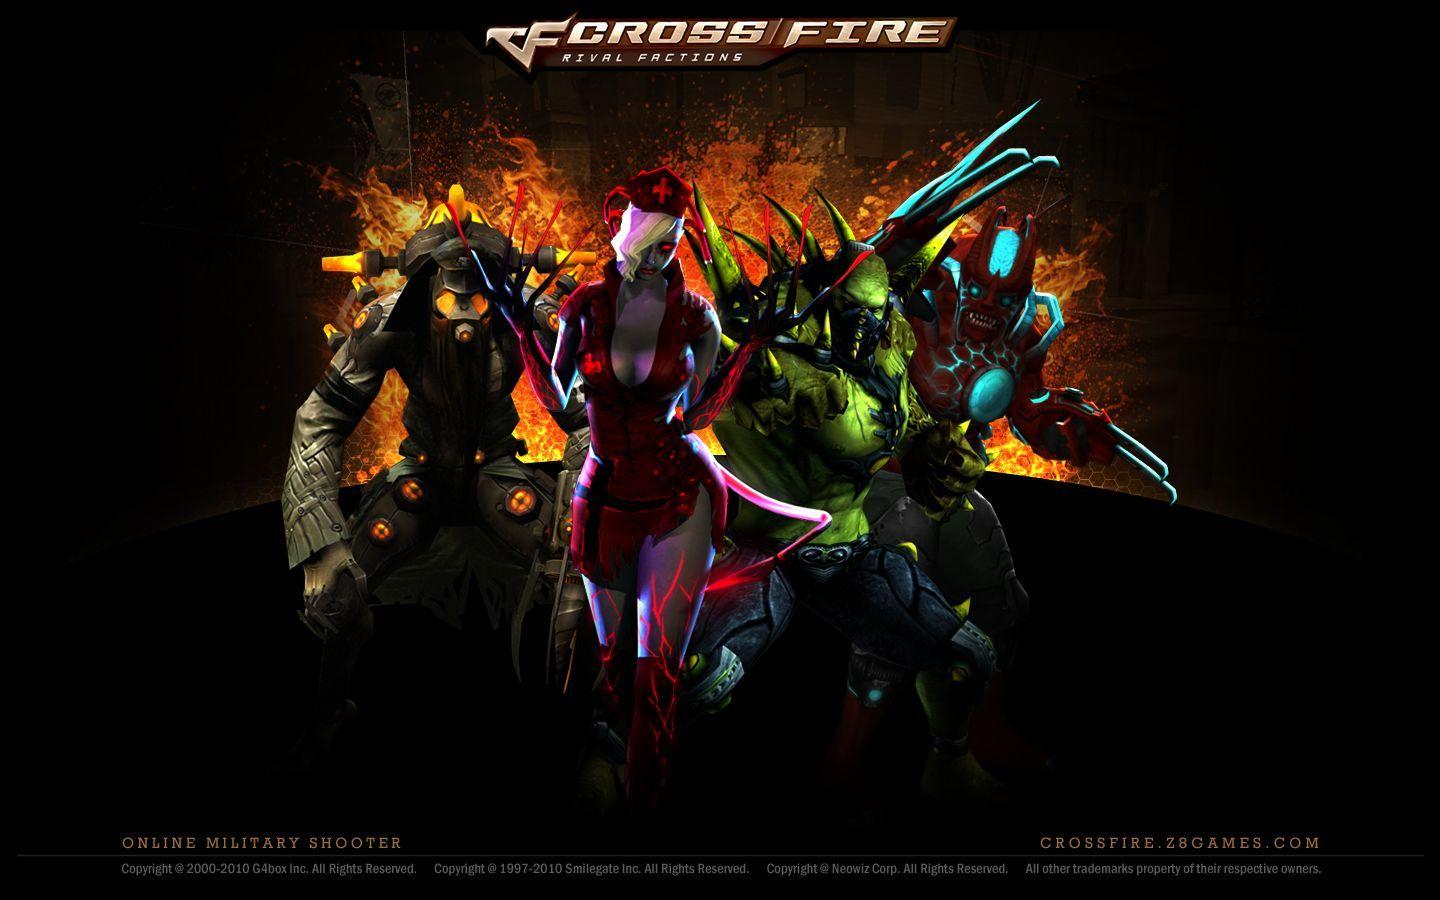 Crossfire 2023 4k Wallpaper,HD Games Wallpapers,4k Wallpapers,Images, Backgrounds,Photos and Pictures